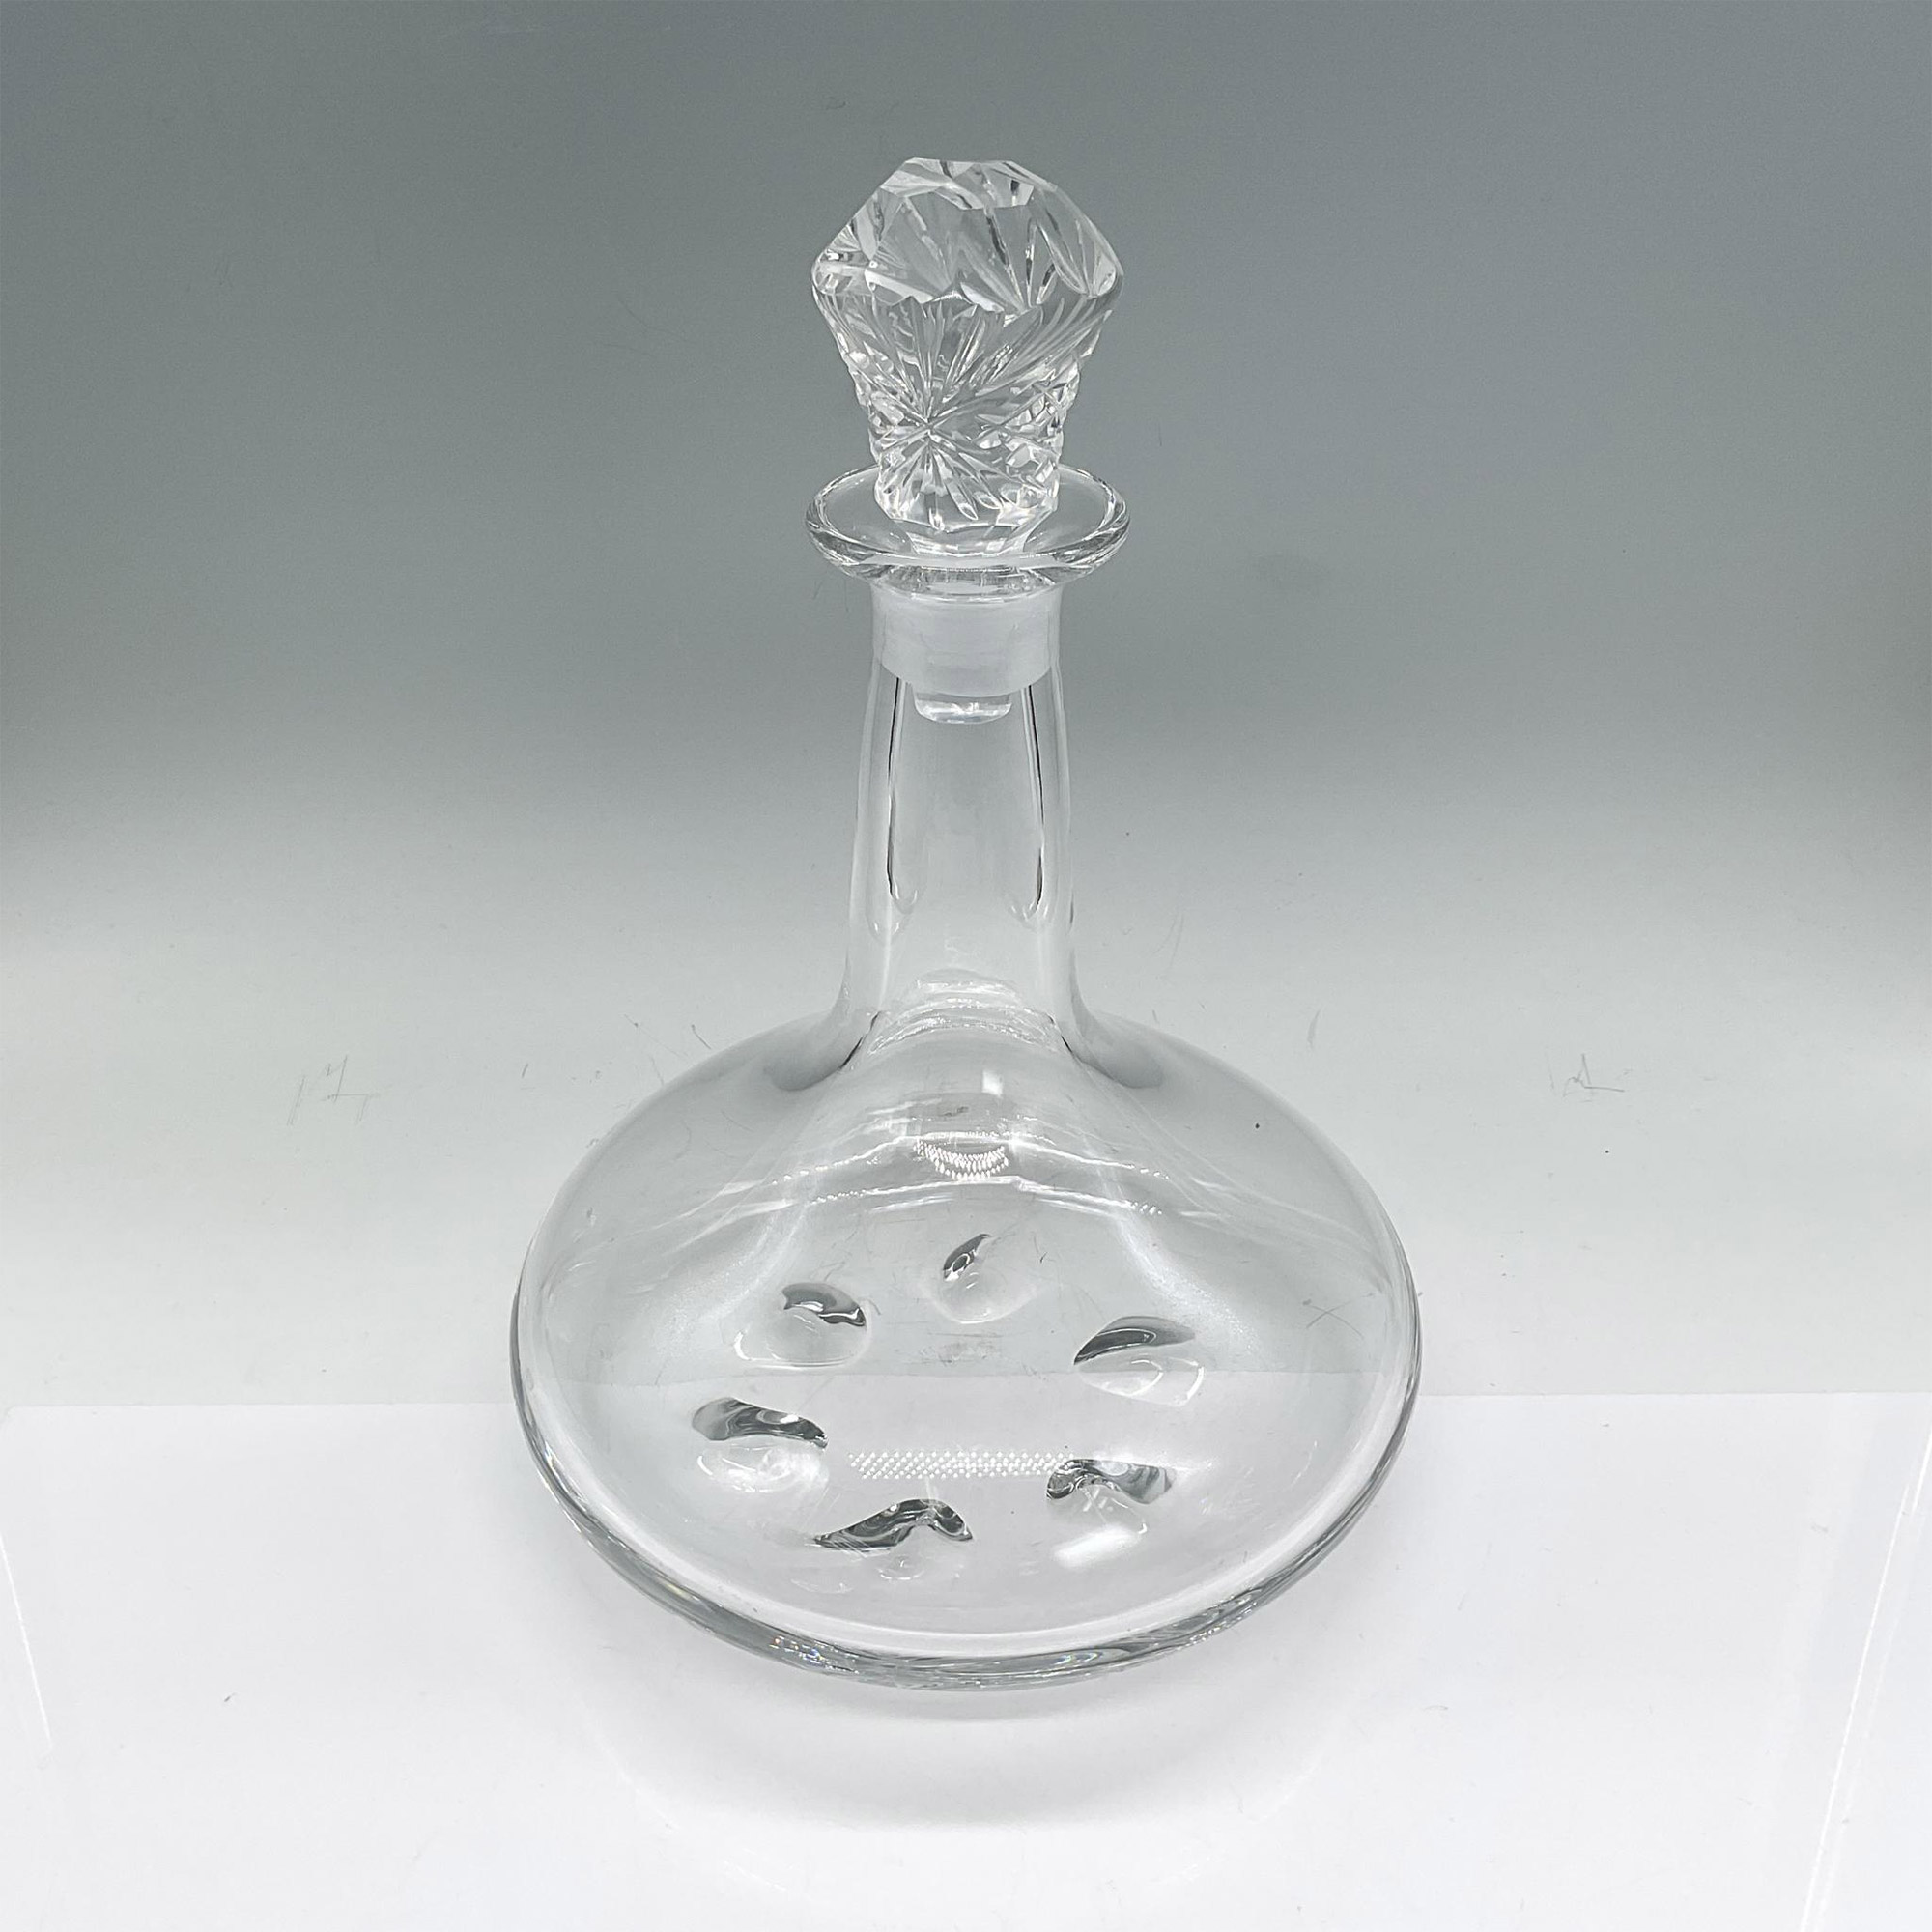 Orrefors Crystal Decanter with Stopper - Image 2 of 3